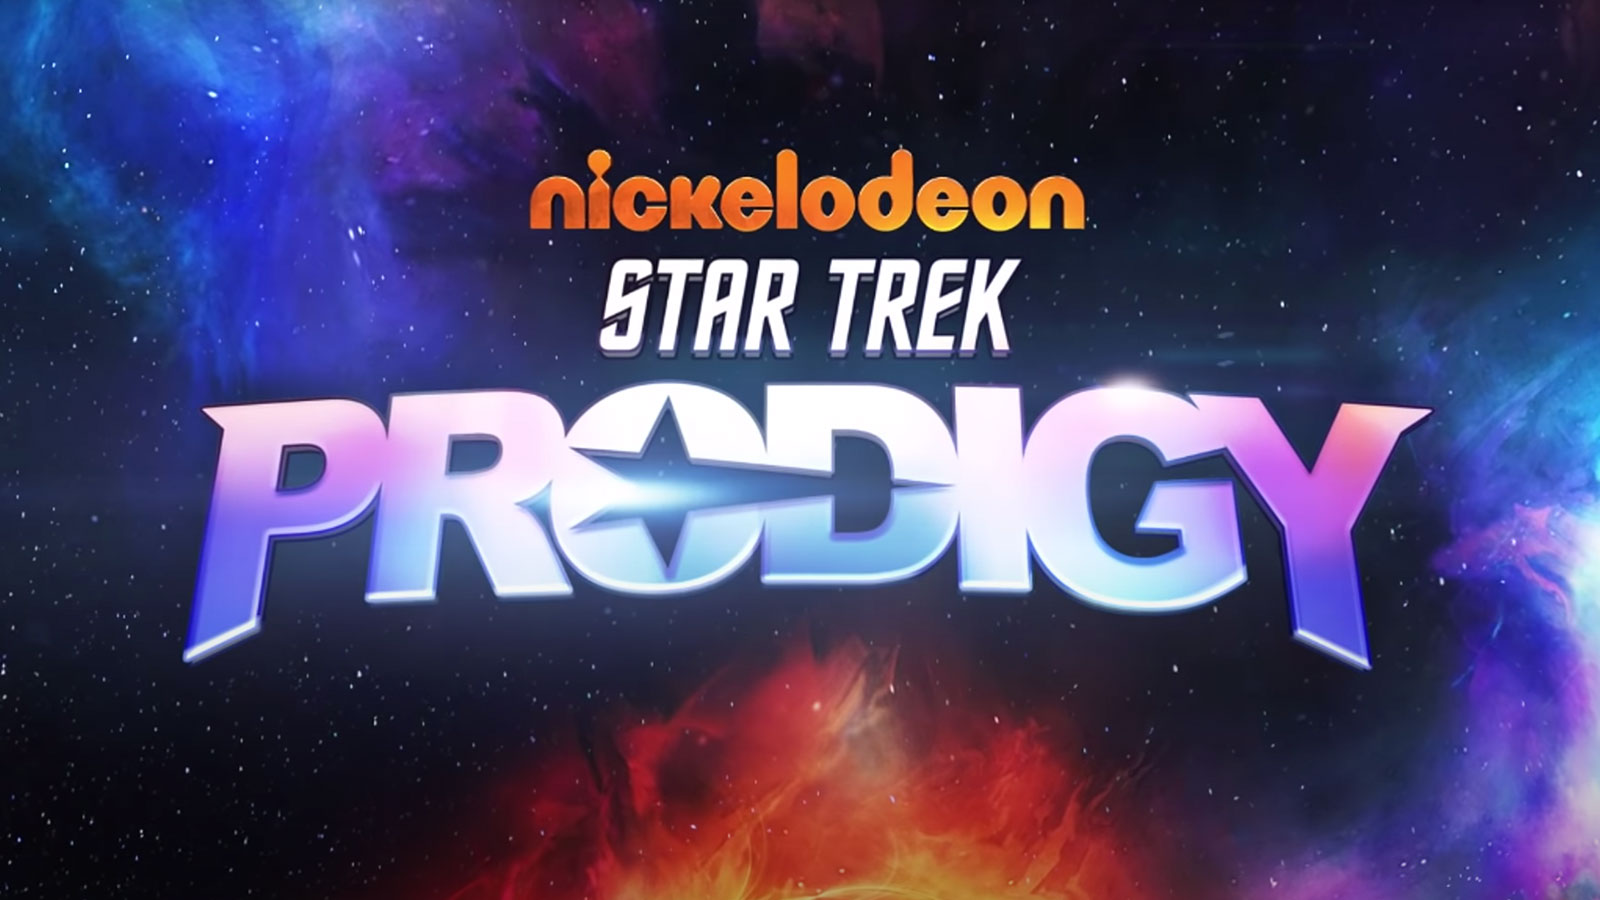 Star Trek: Prodigy Announced, Coming To Nickelodeon In 2021